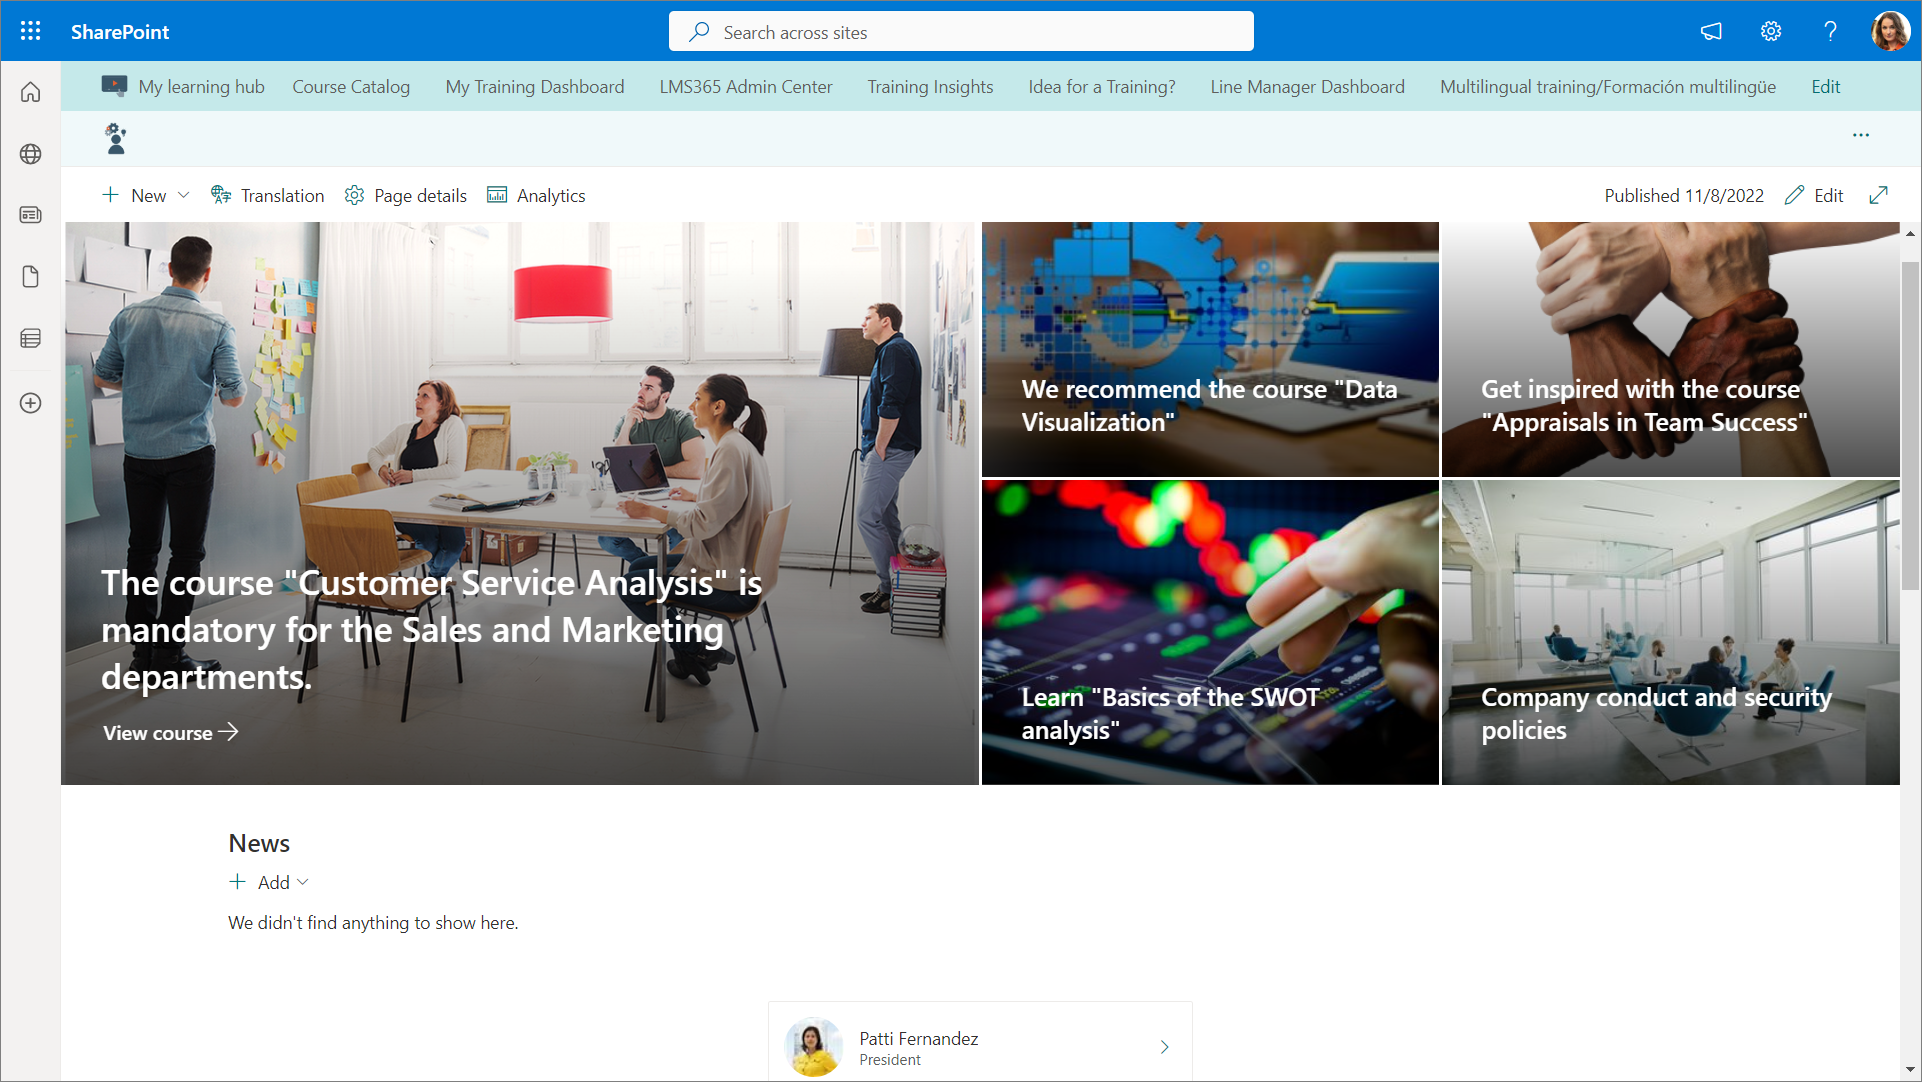 Customized_SharePoint_home_page.png